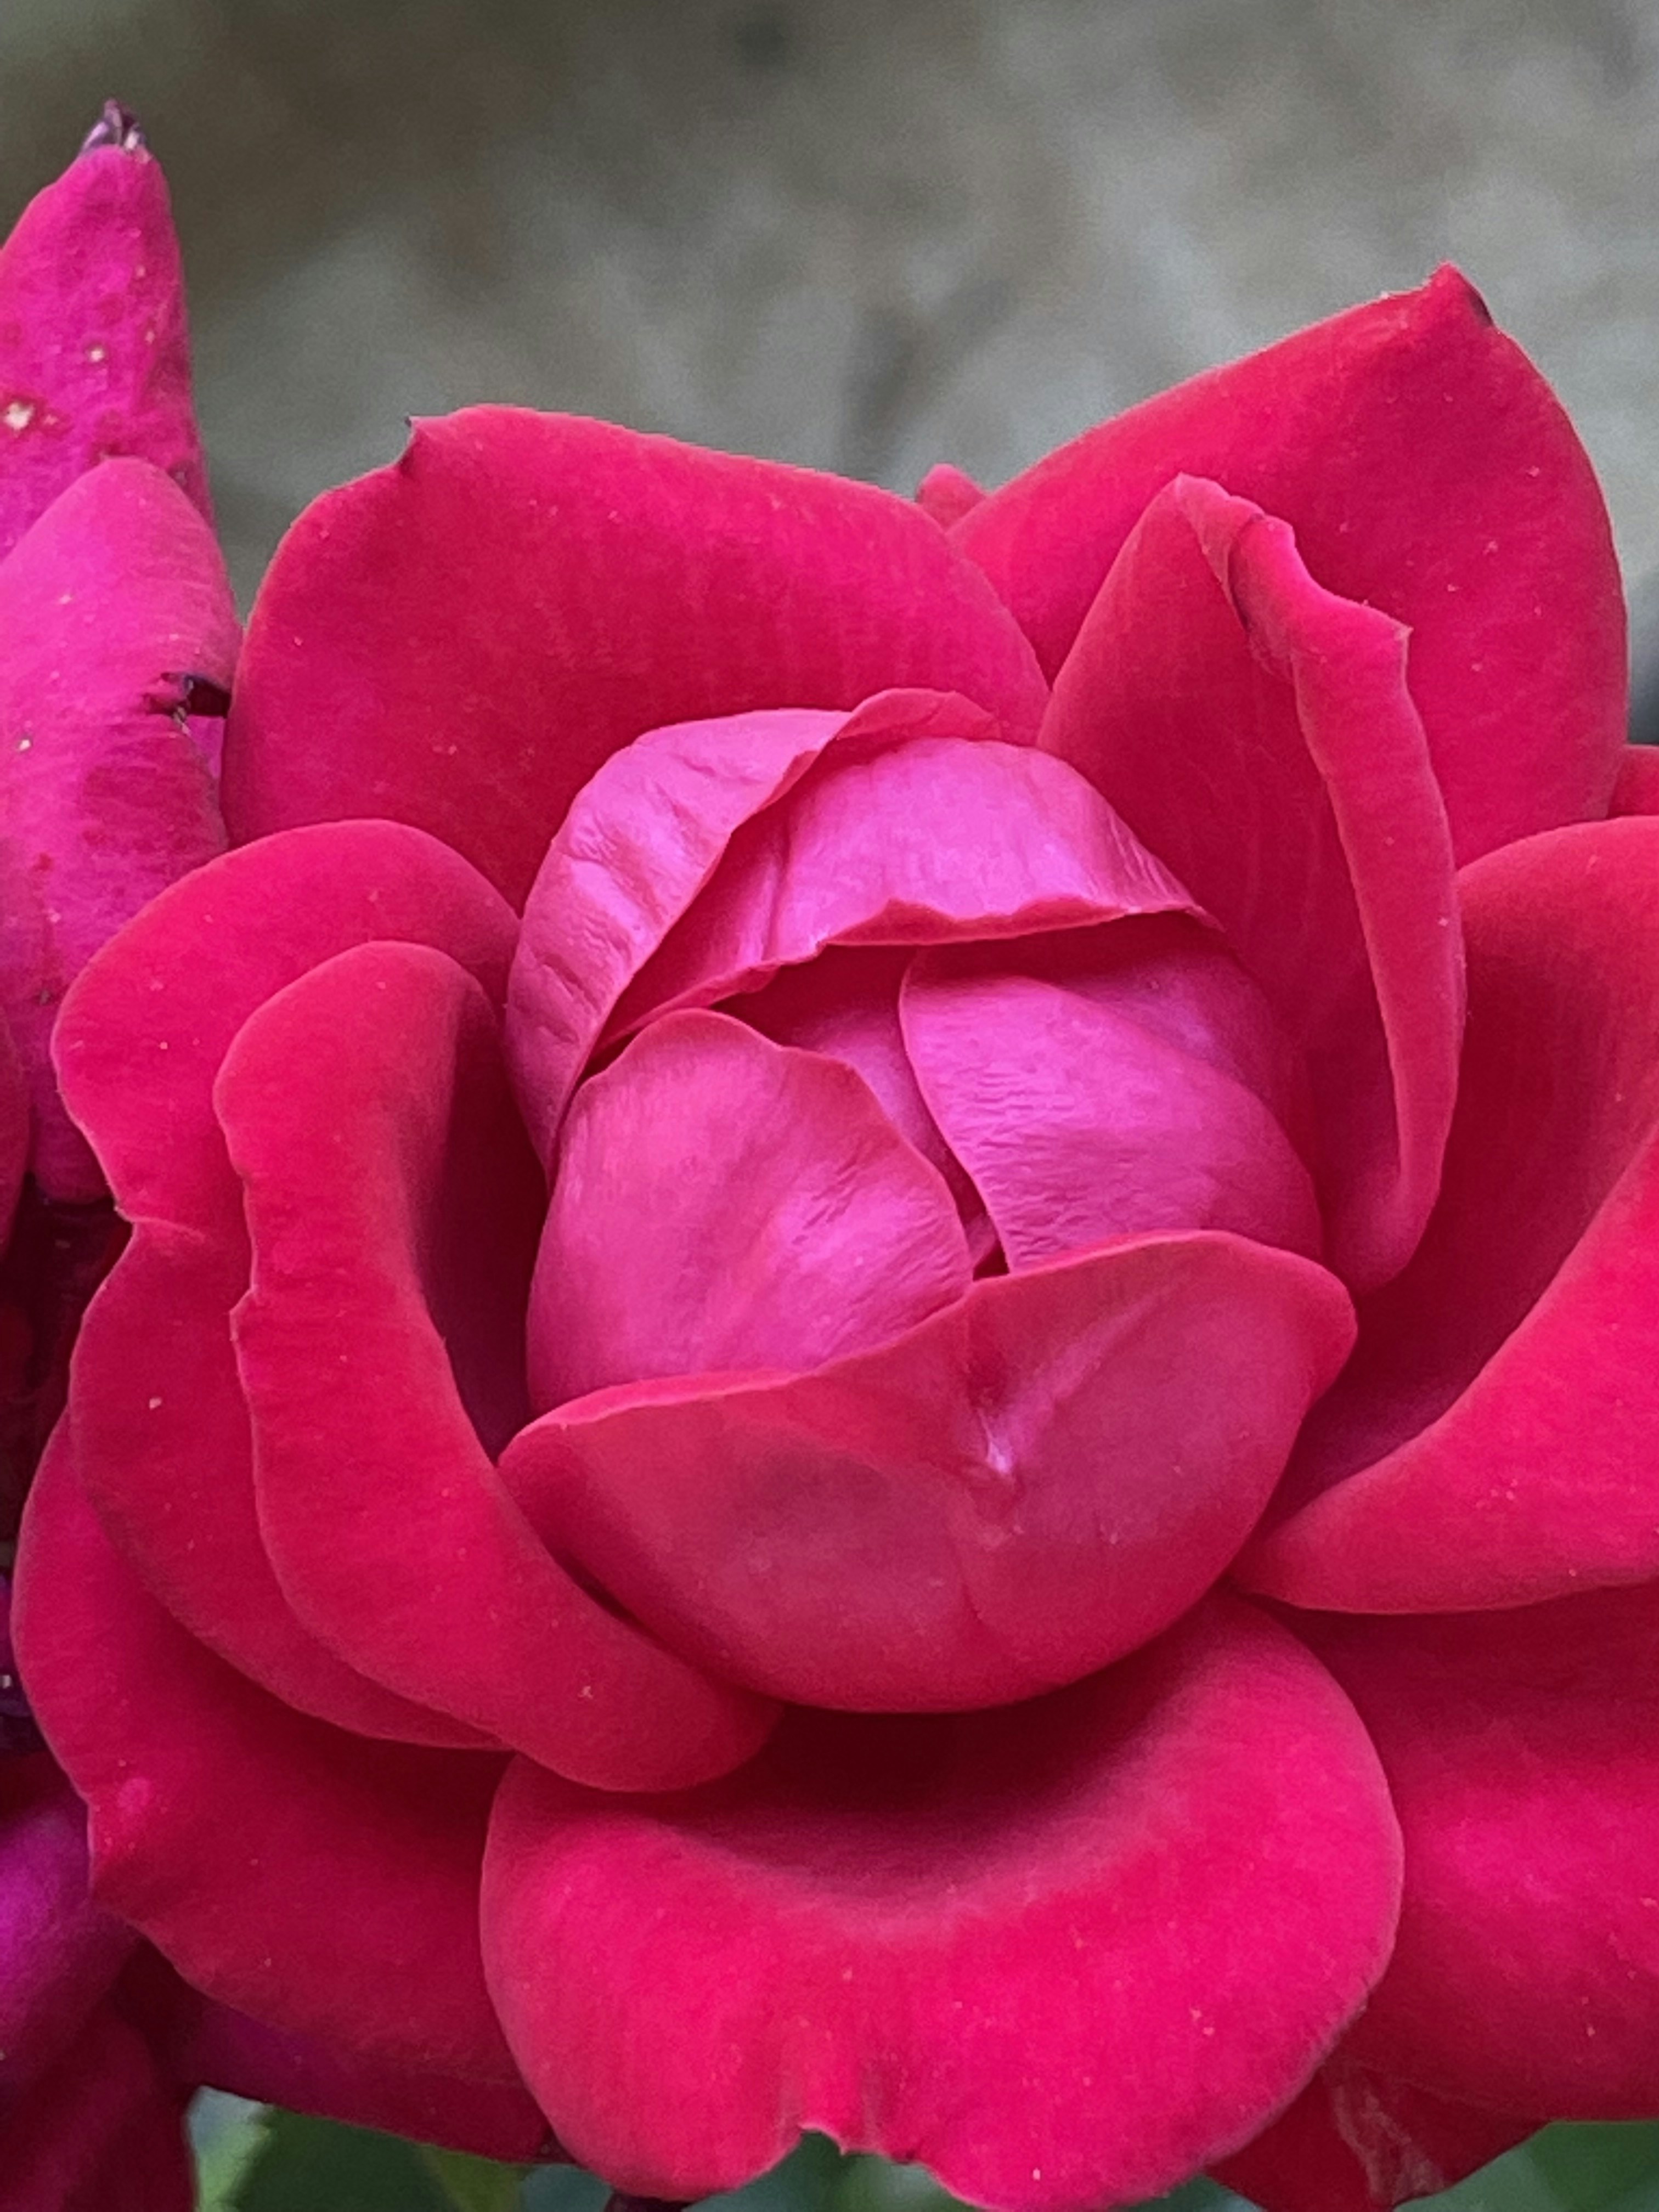 A Rose. My favorite flower. iphone 12 photography. Taken by Clara T. Mills.